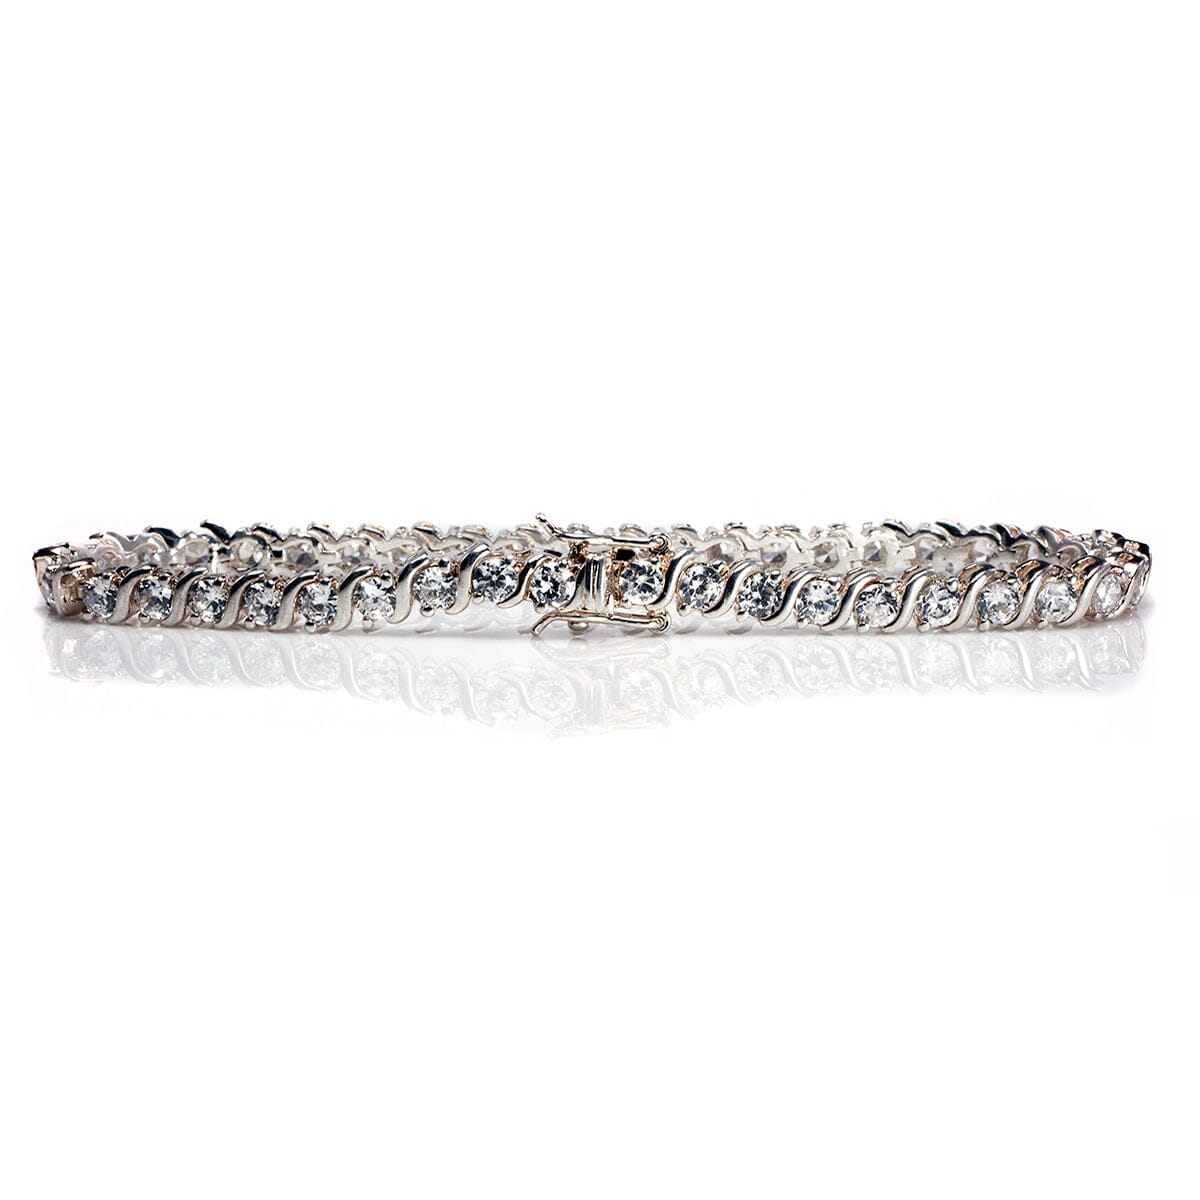 Great Lakes Boutique Silver and Cubic Zirconia Tennis Bracelet